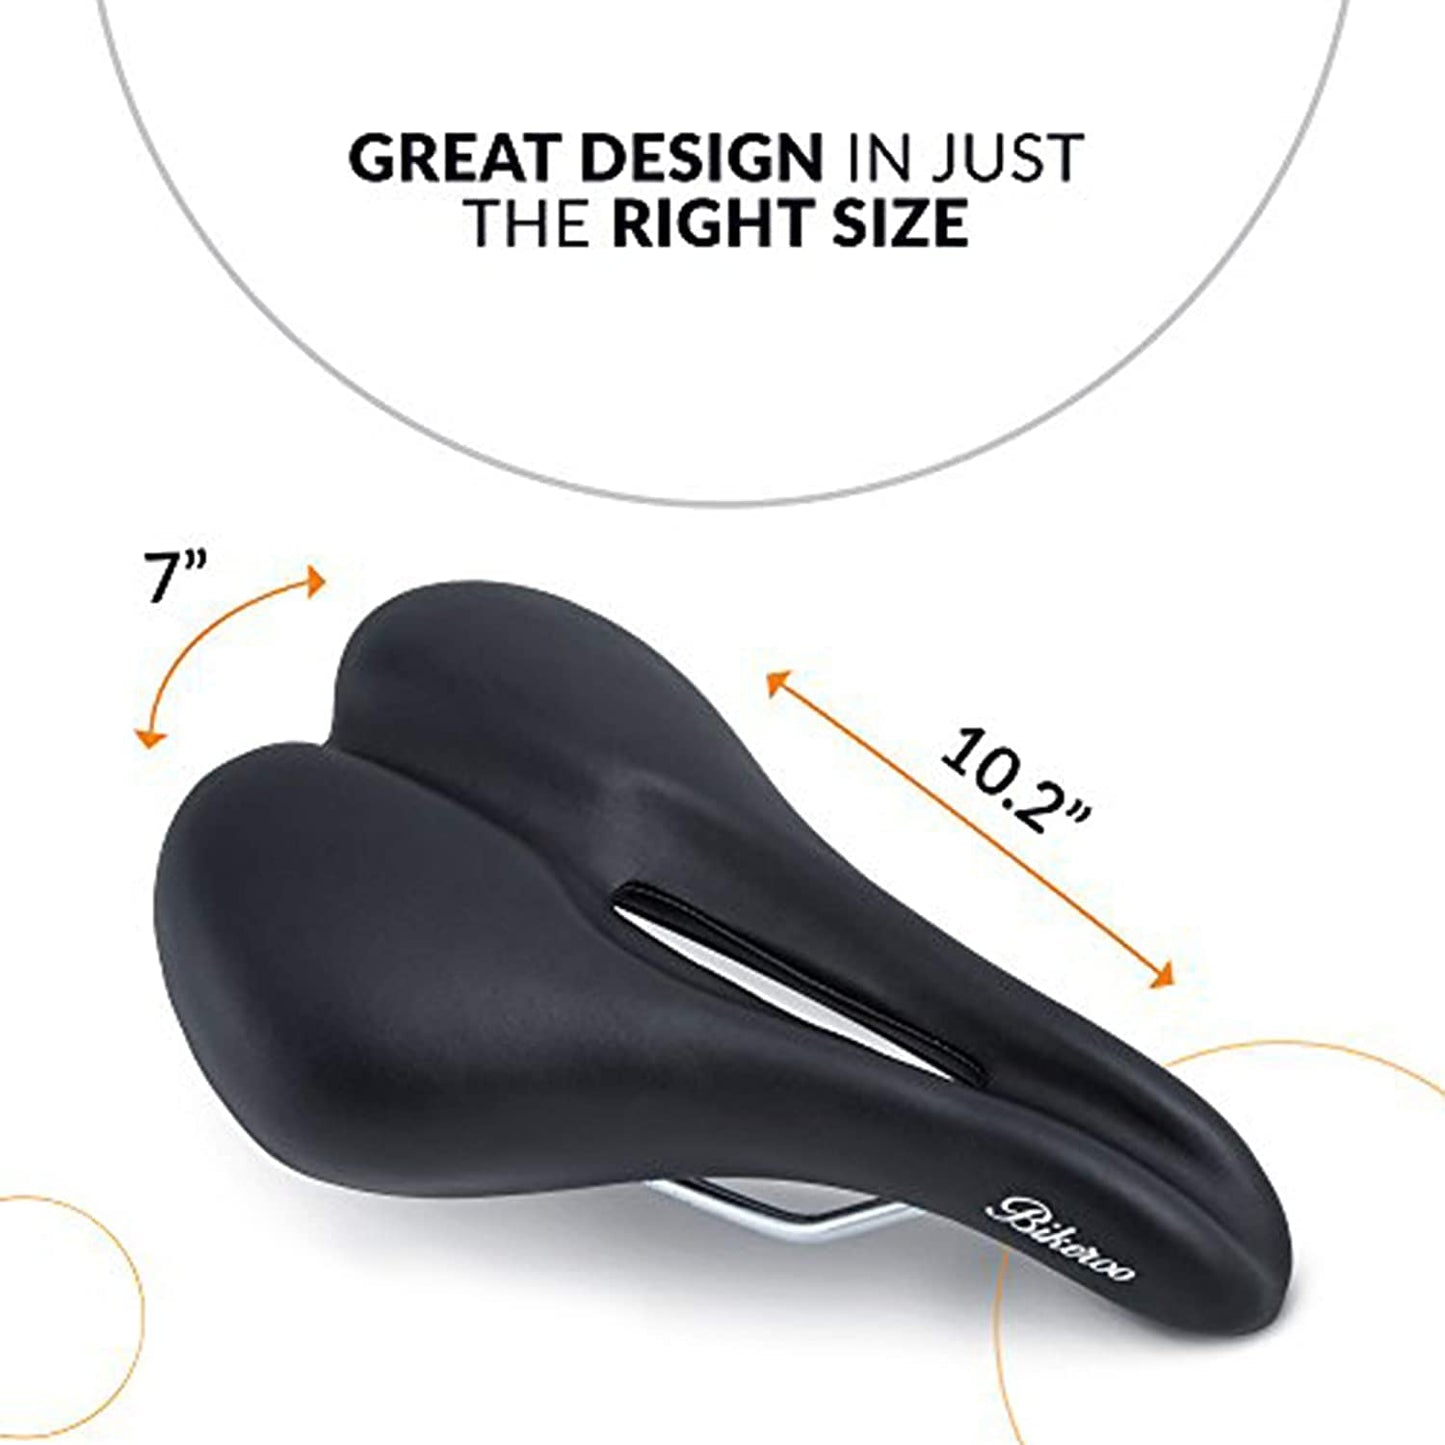 Bikeroo Most Comfortable Bike Seat for Men - Padded Bicycle Saddle for Men with Soft Cushion - Improves Comfort for Mountain Bike, Hybrid and Stationary Exercise Bike - (For 6 piece(s))